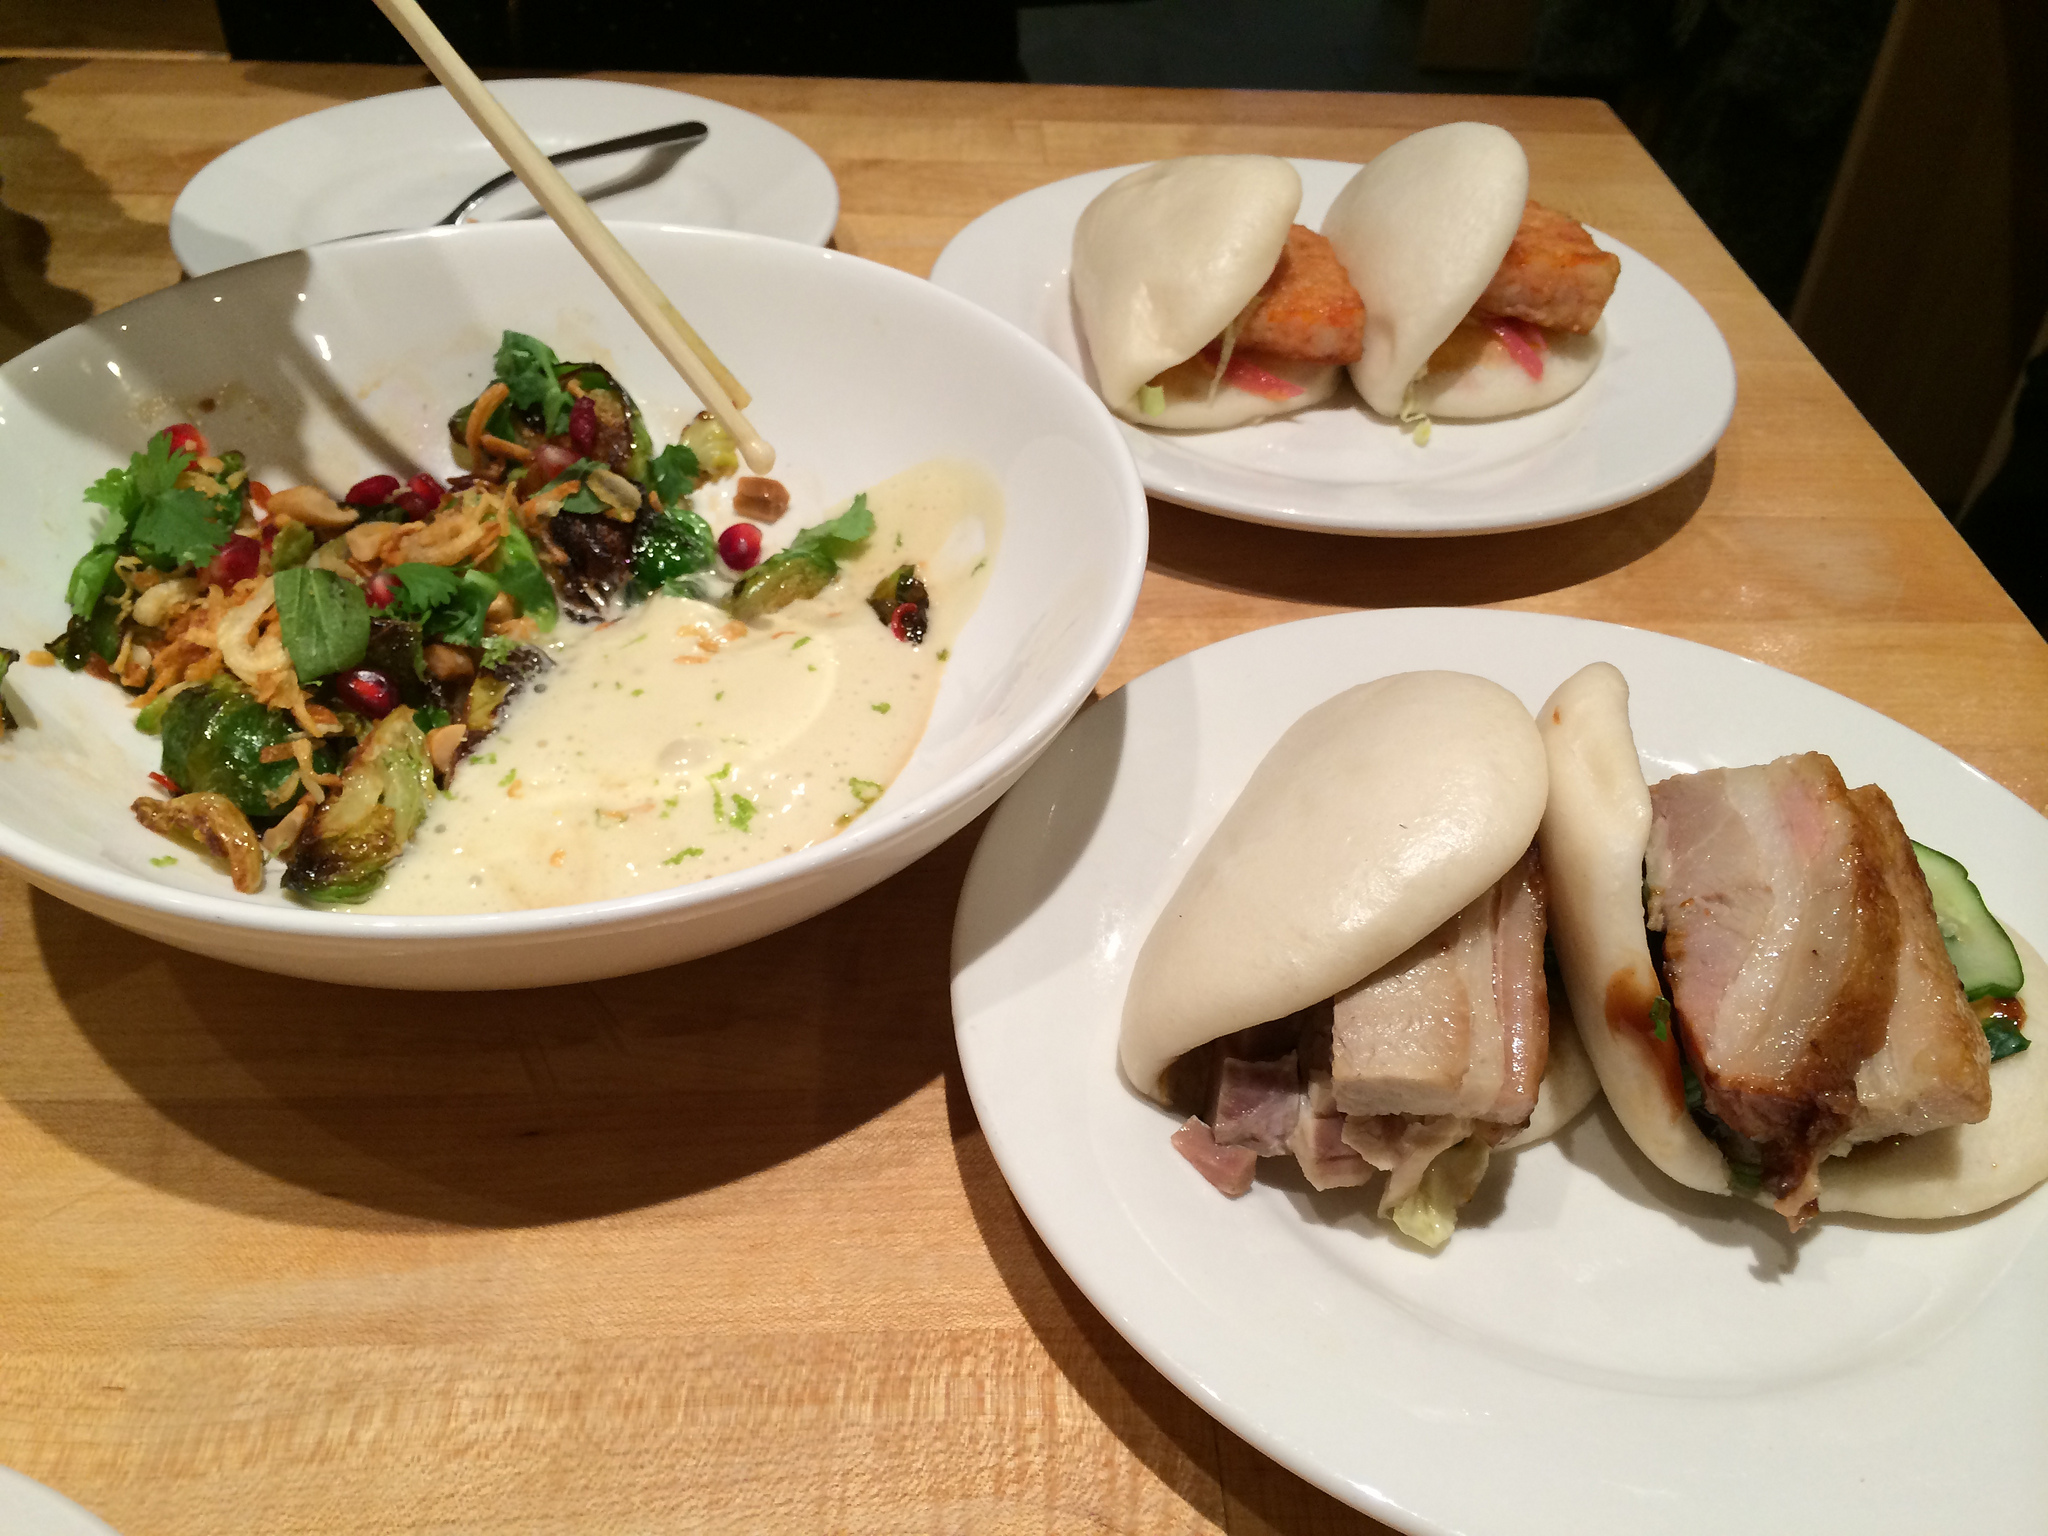 Buns and brussel sprouts at Momofuku Noodle Bar in New York. Photo by alphacityguides.